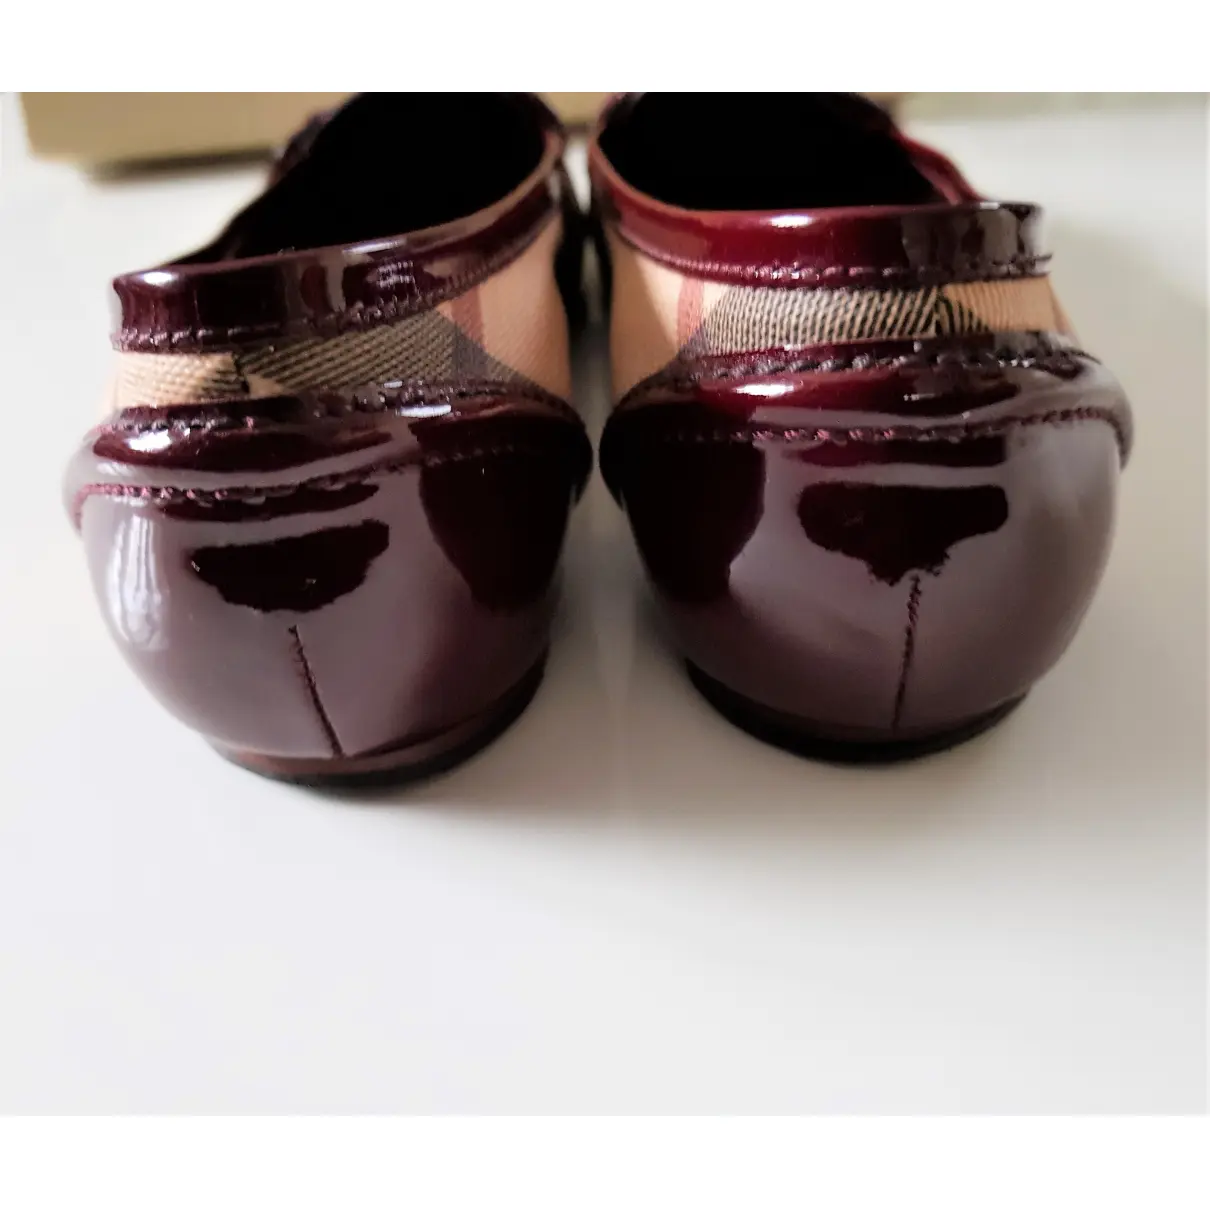 Patent leather ballet flats Burberry